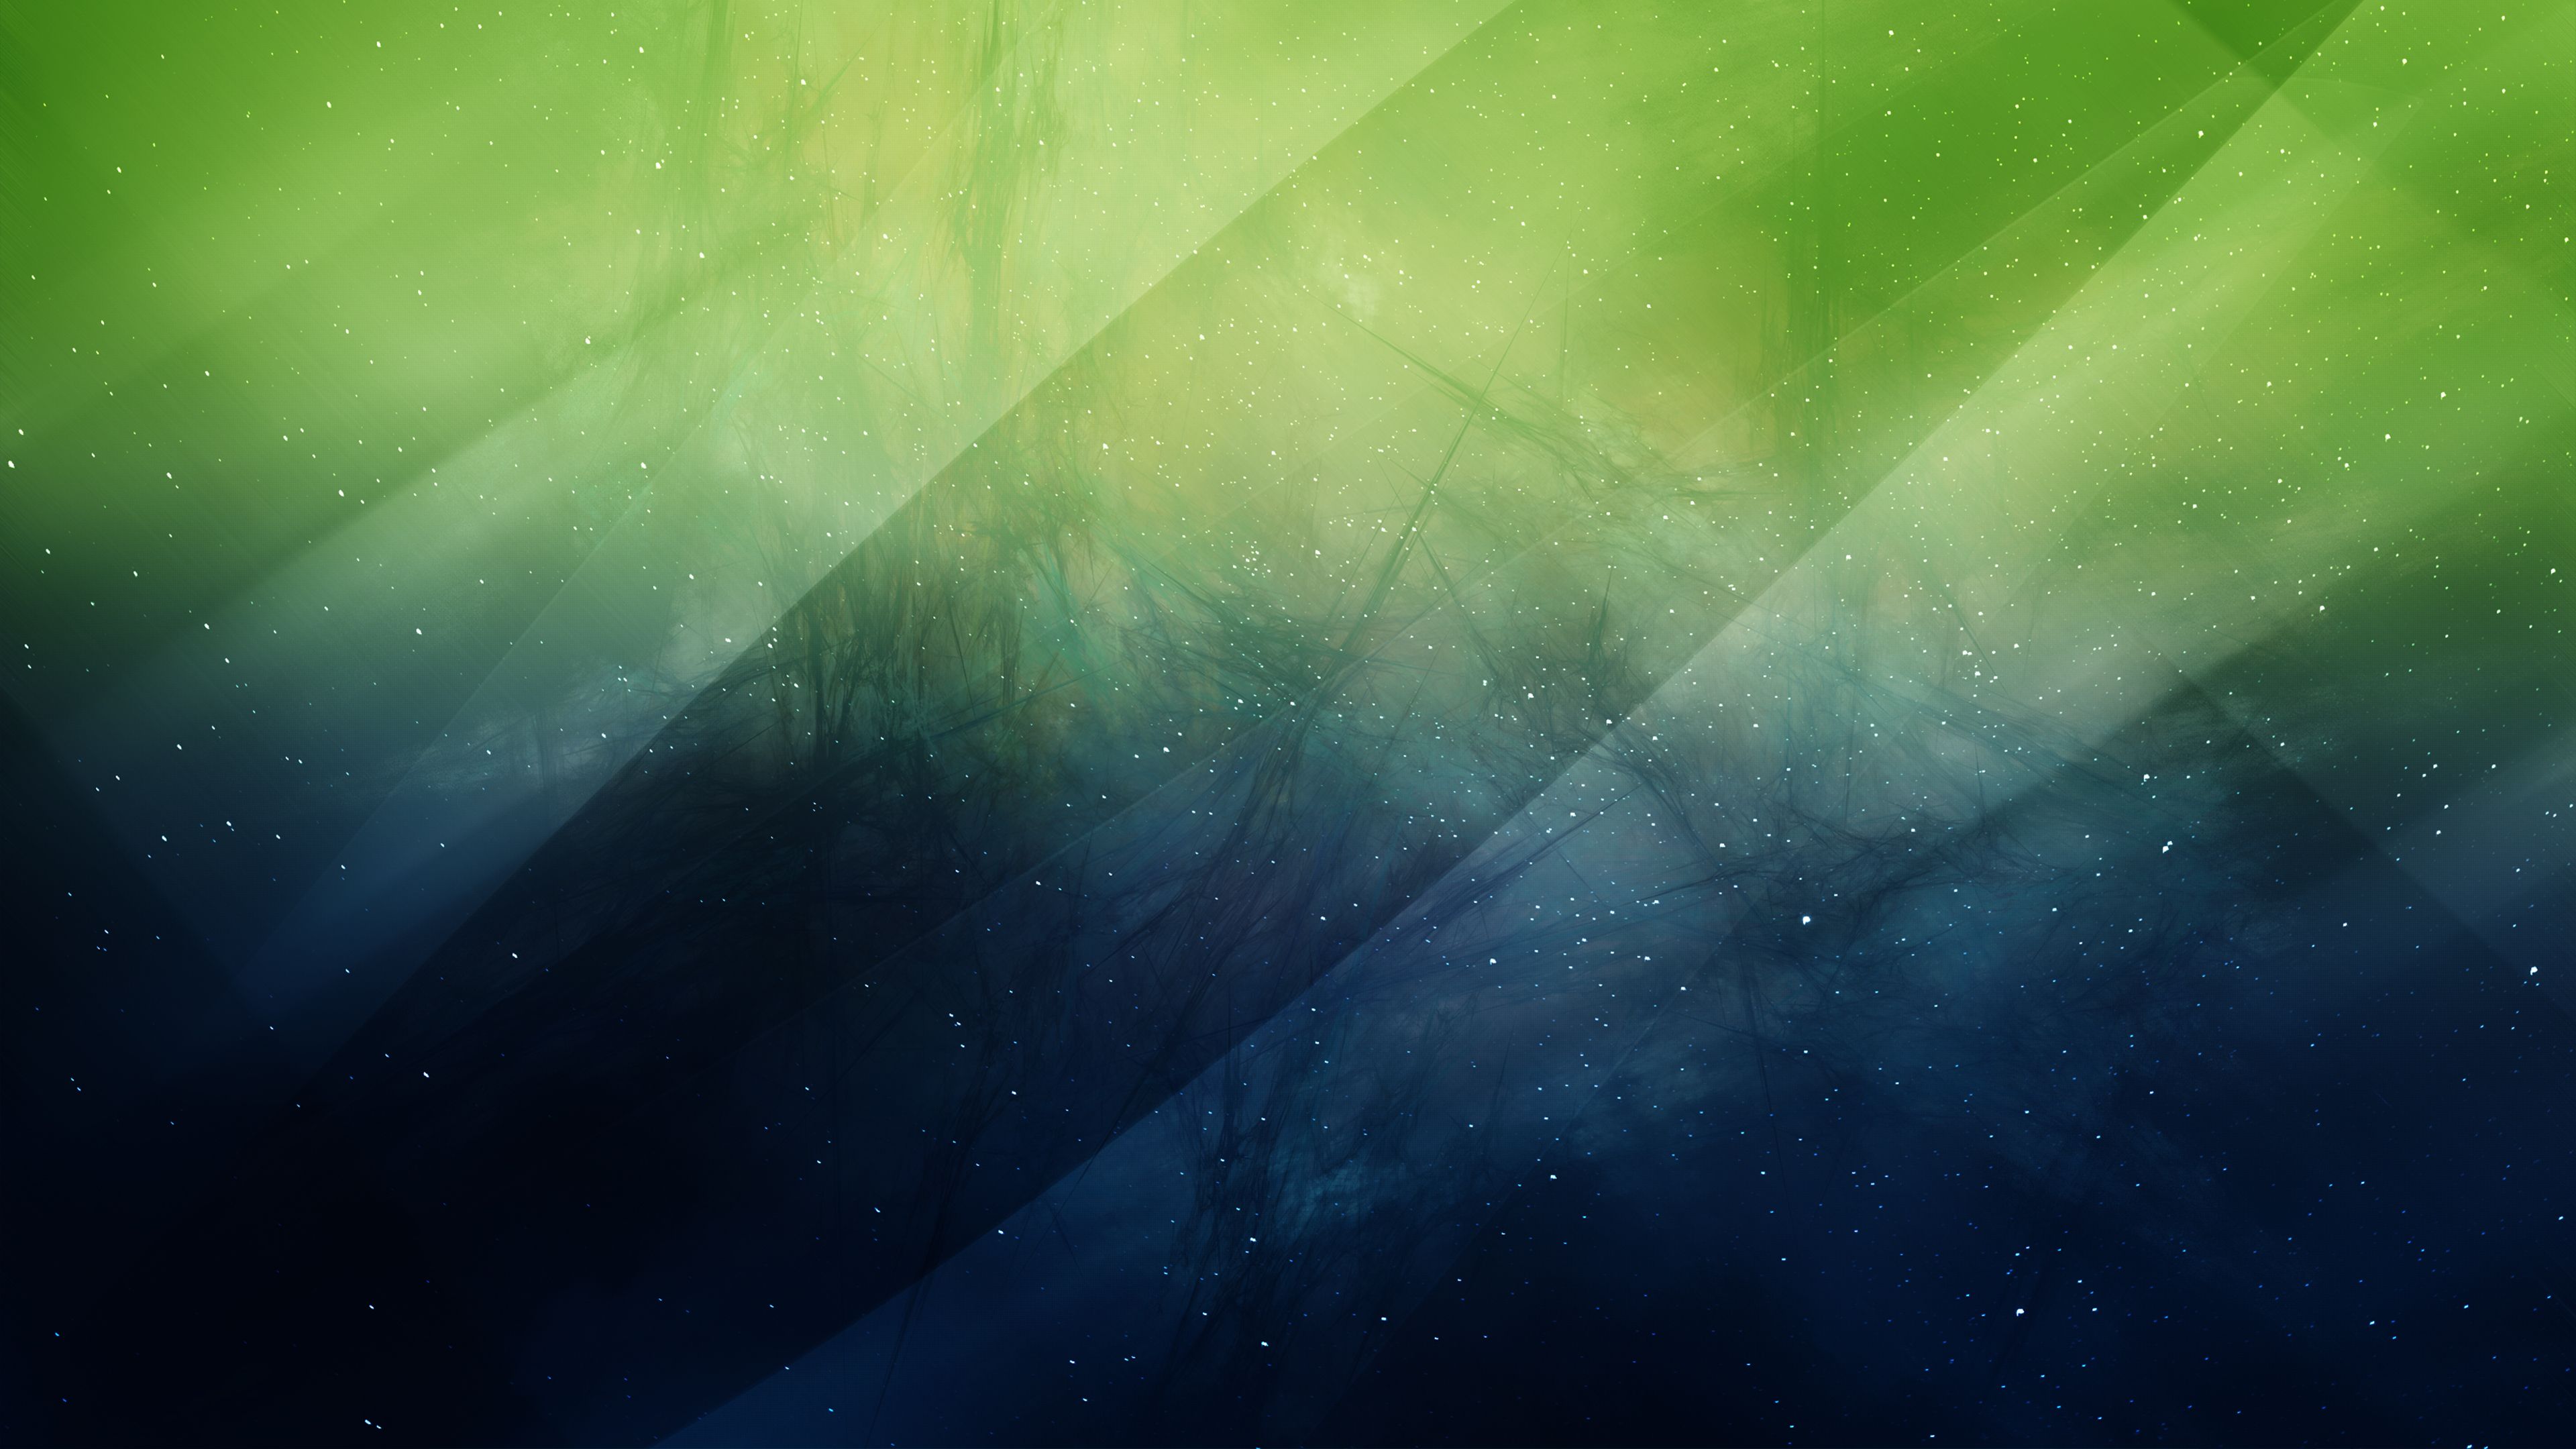 4k Green Abstract Wallpapers Wallpaper Cave